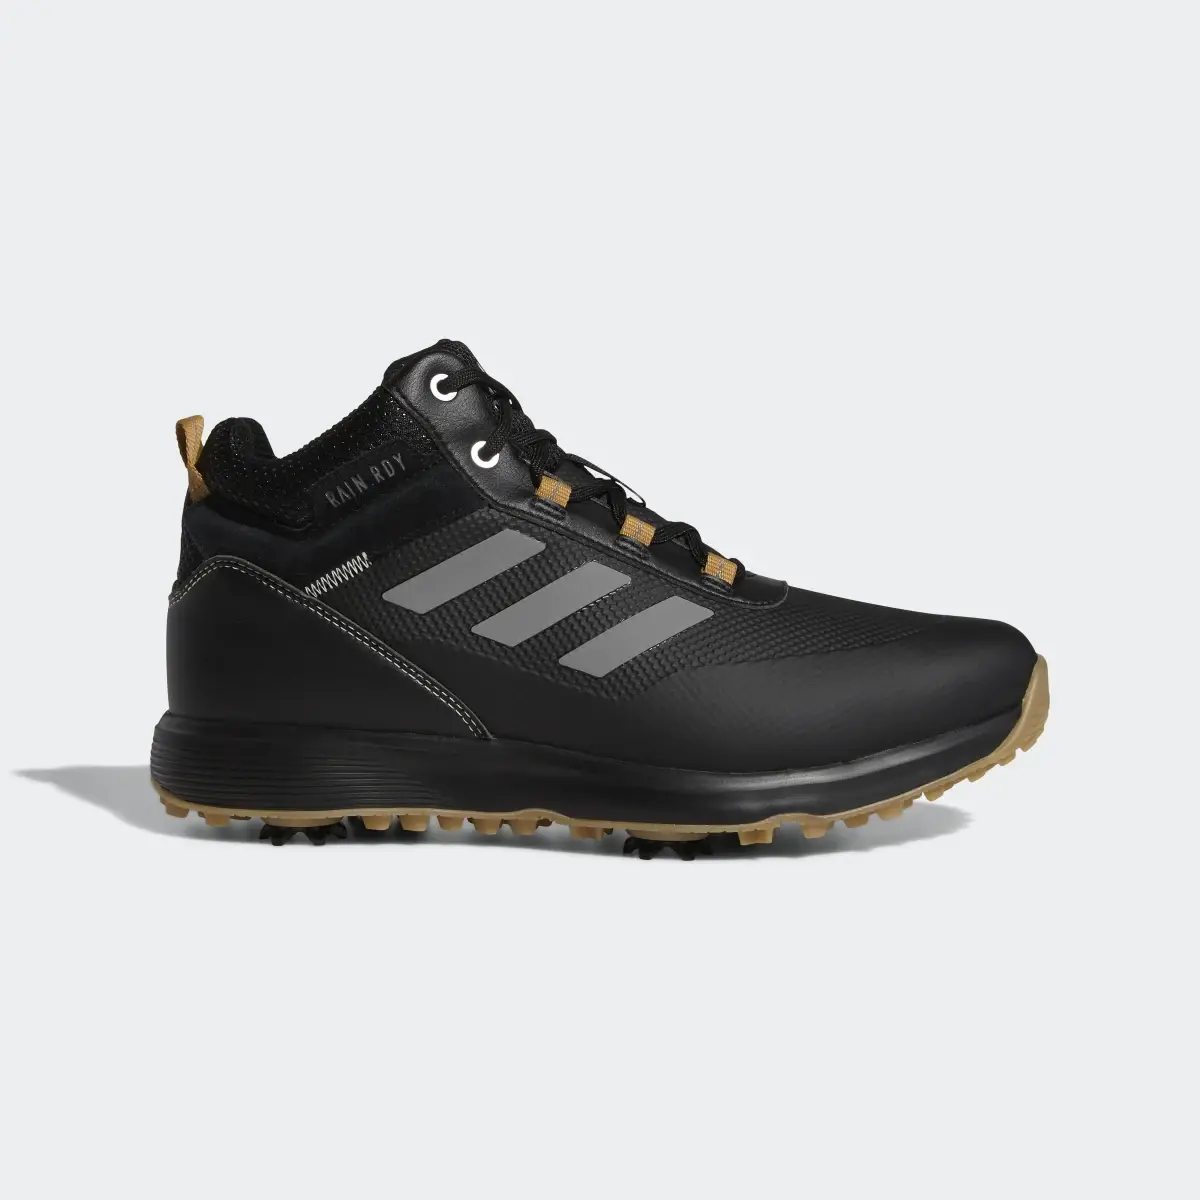 Adidas S2G Recycled Polyester Mid-Cut Golf Shoes. 2